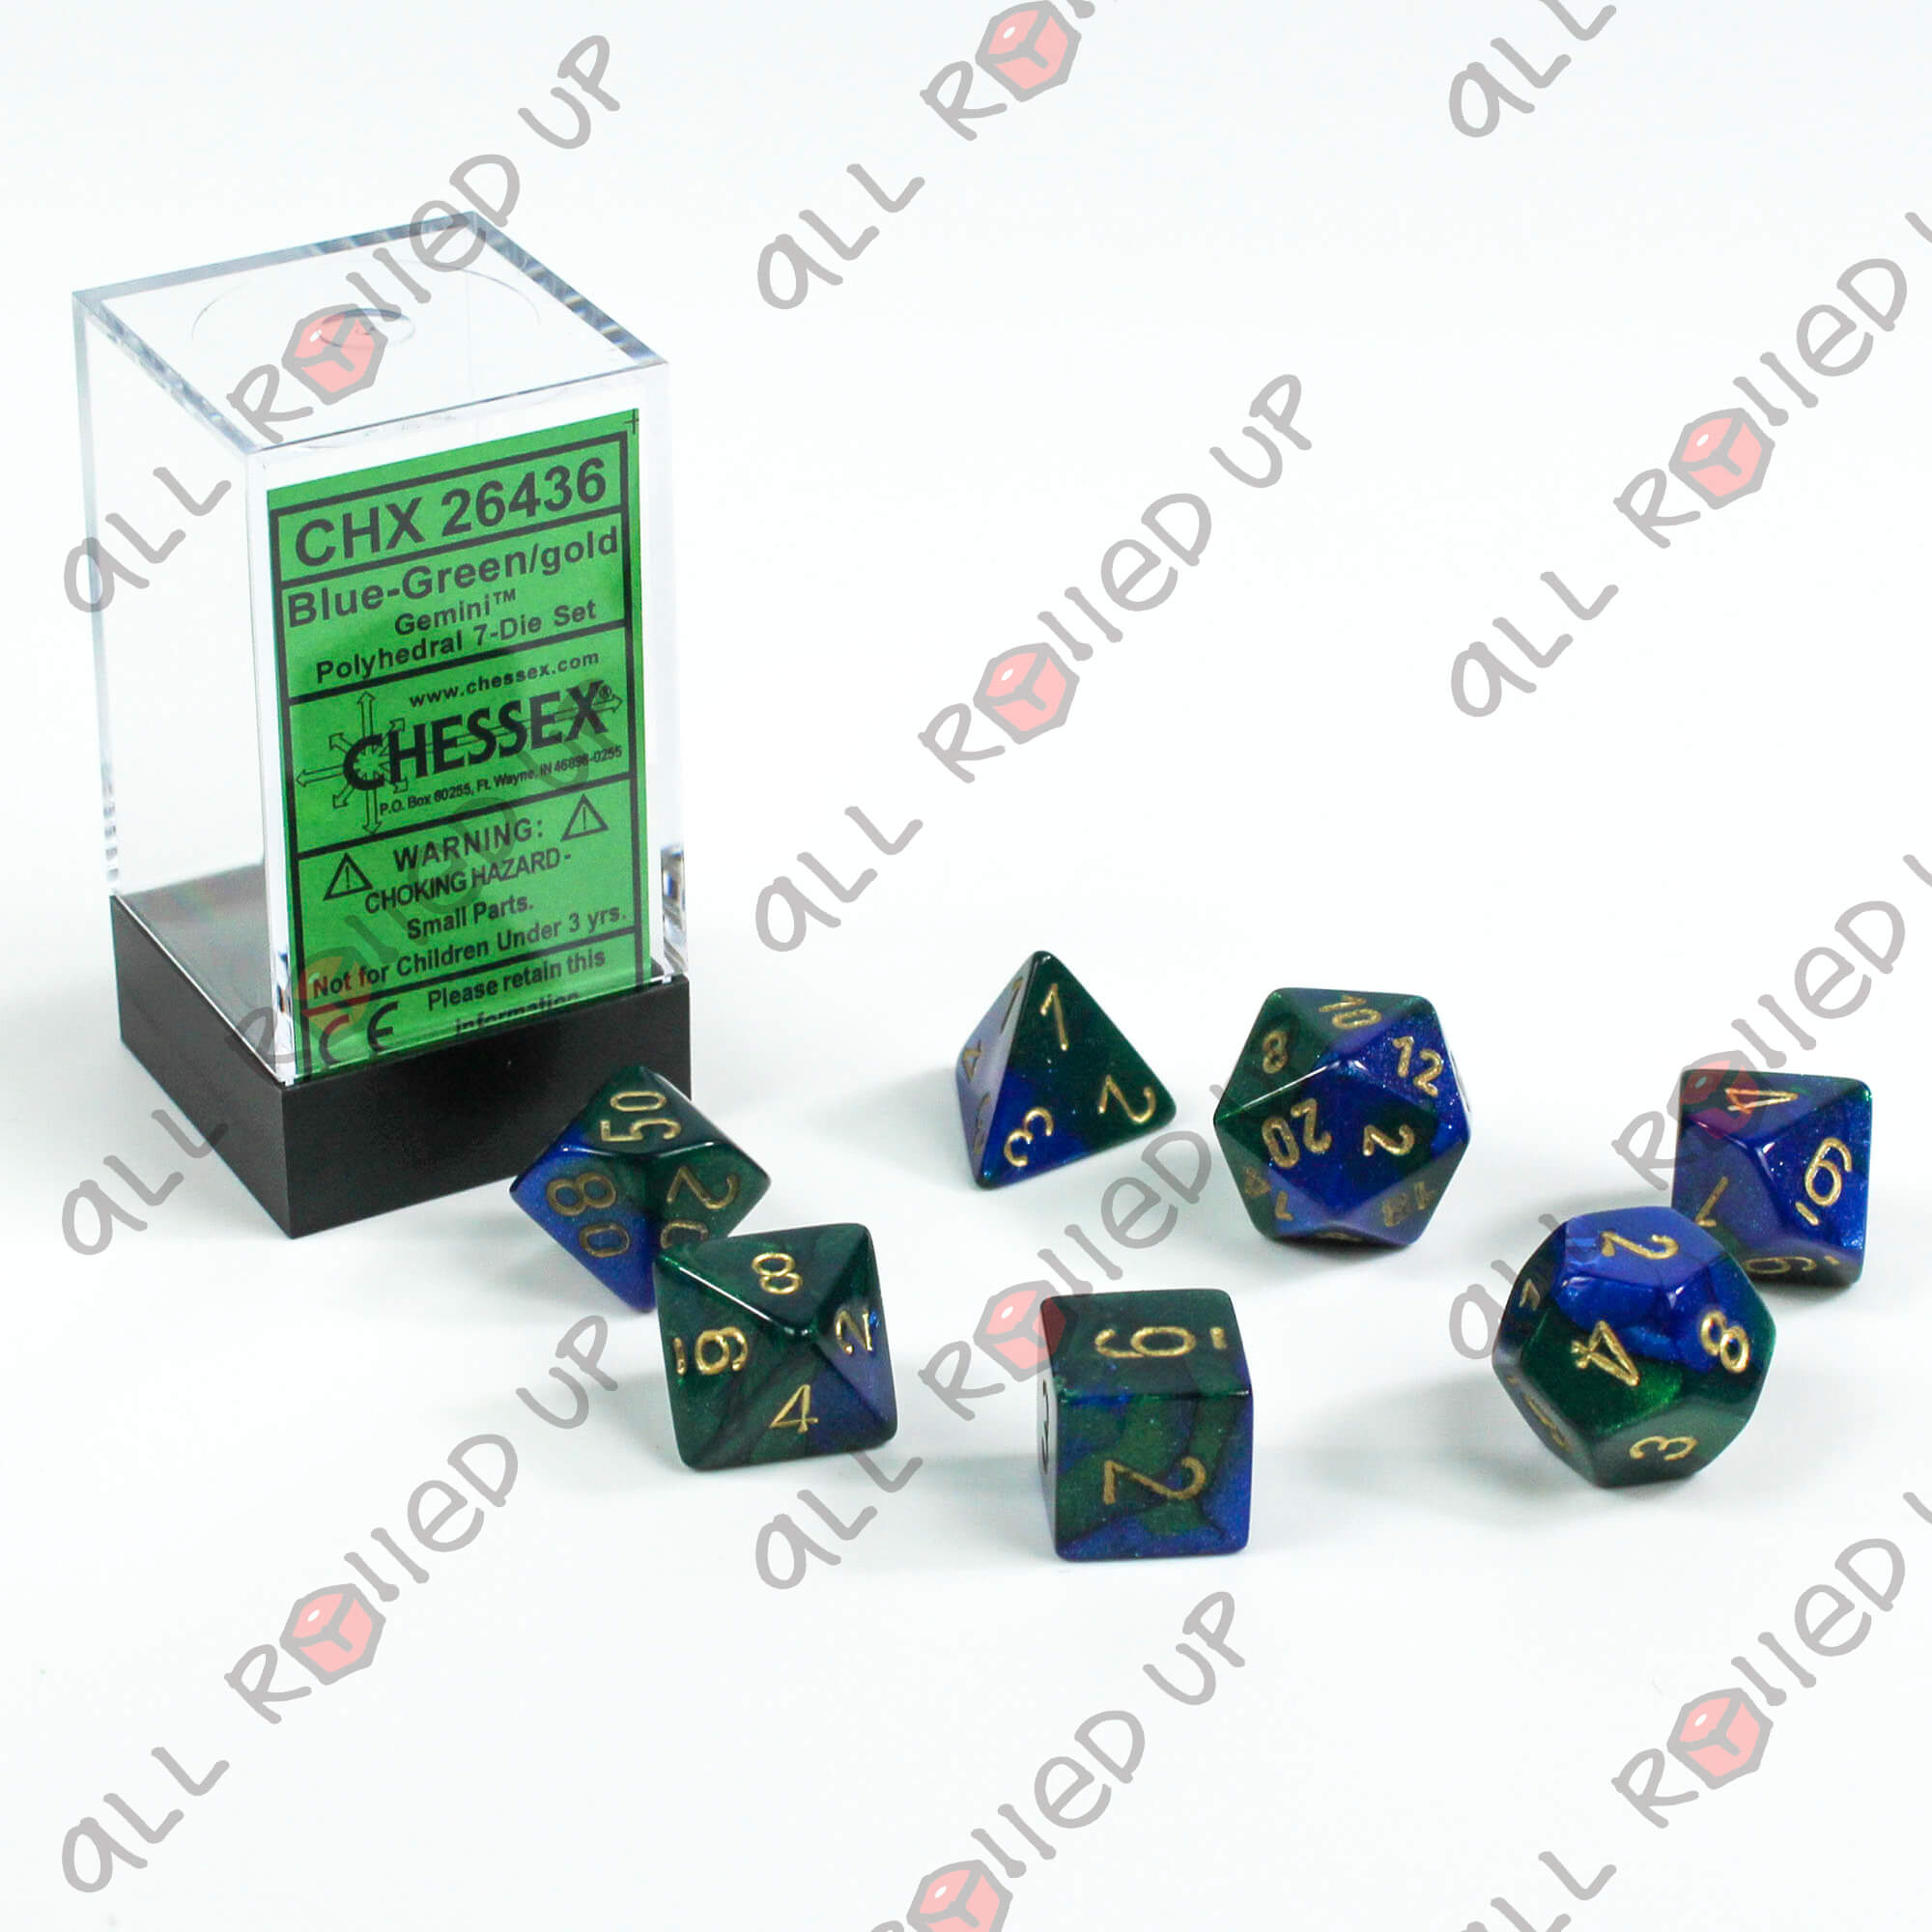 Blue-Green with Gold Polyhedral 7-Die Gemini Dice Set